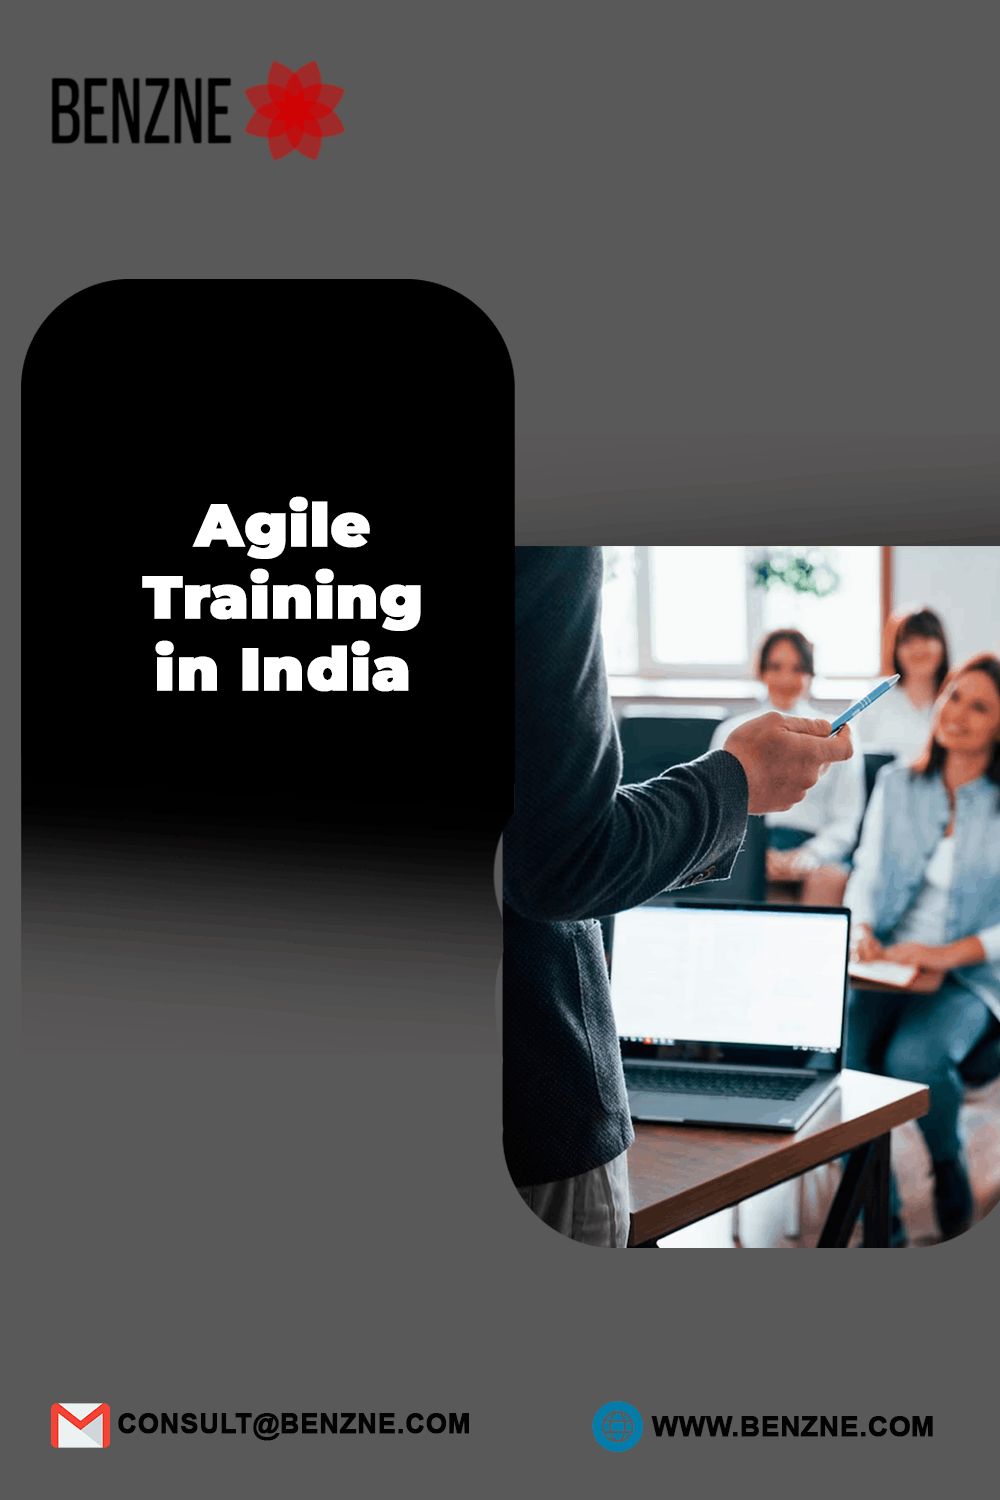 Benzne Agile Training In India- A Better Training Expert To Away Your Worries